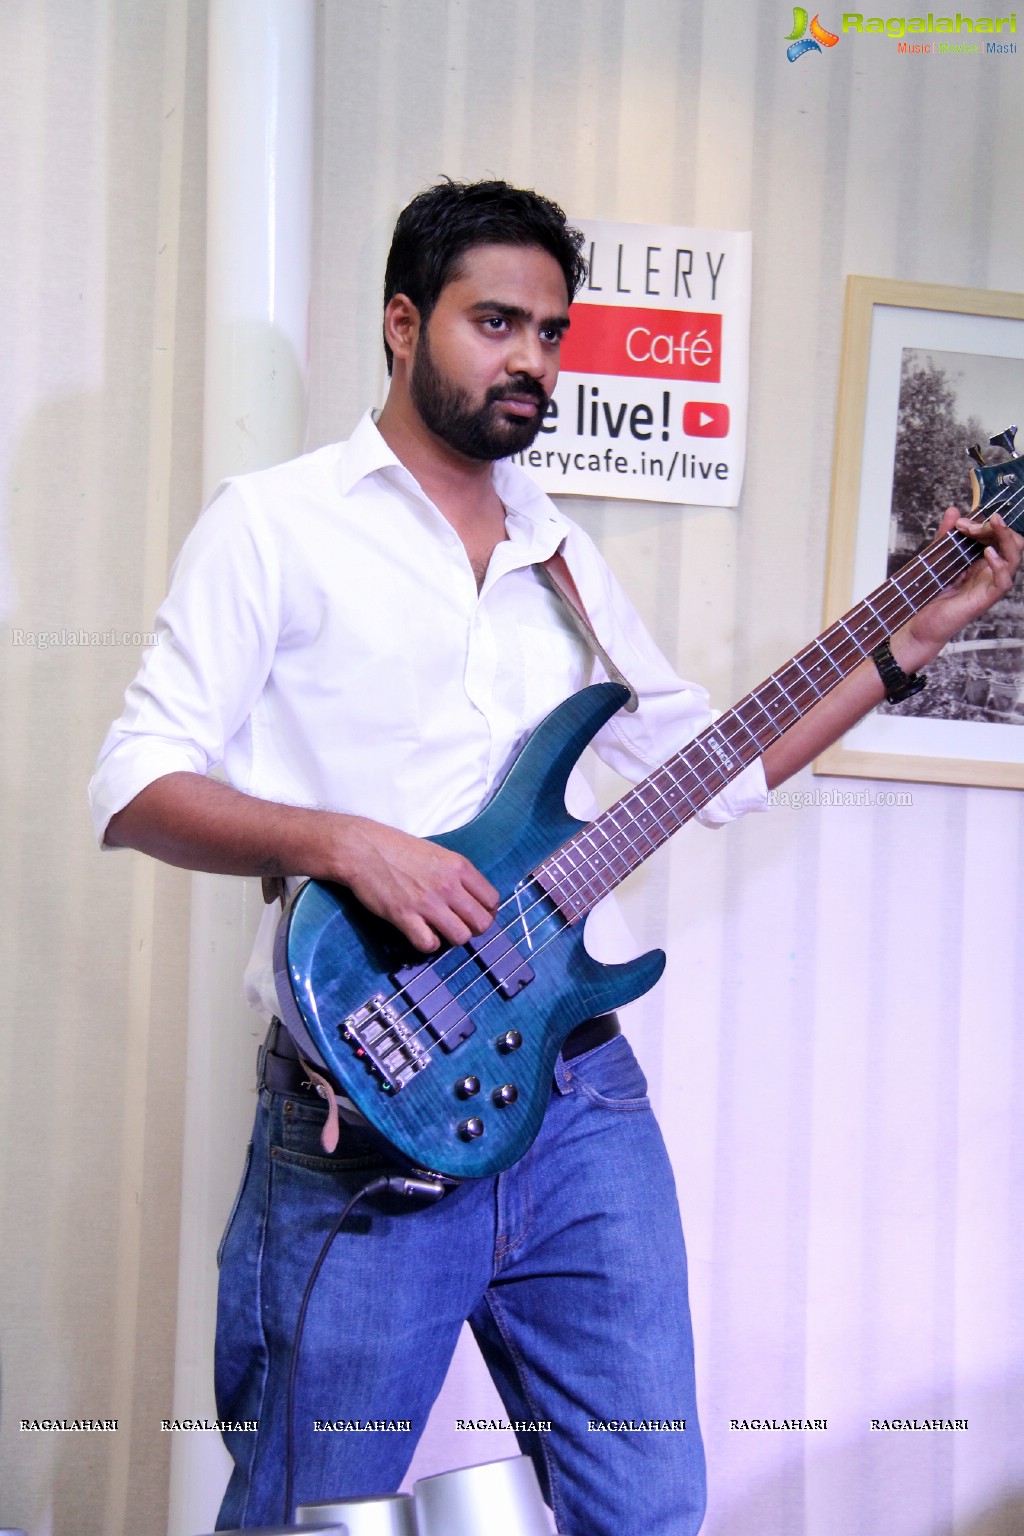 Book Launch and JhaalMoody Blues at The Gallery Cafe